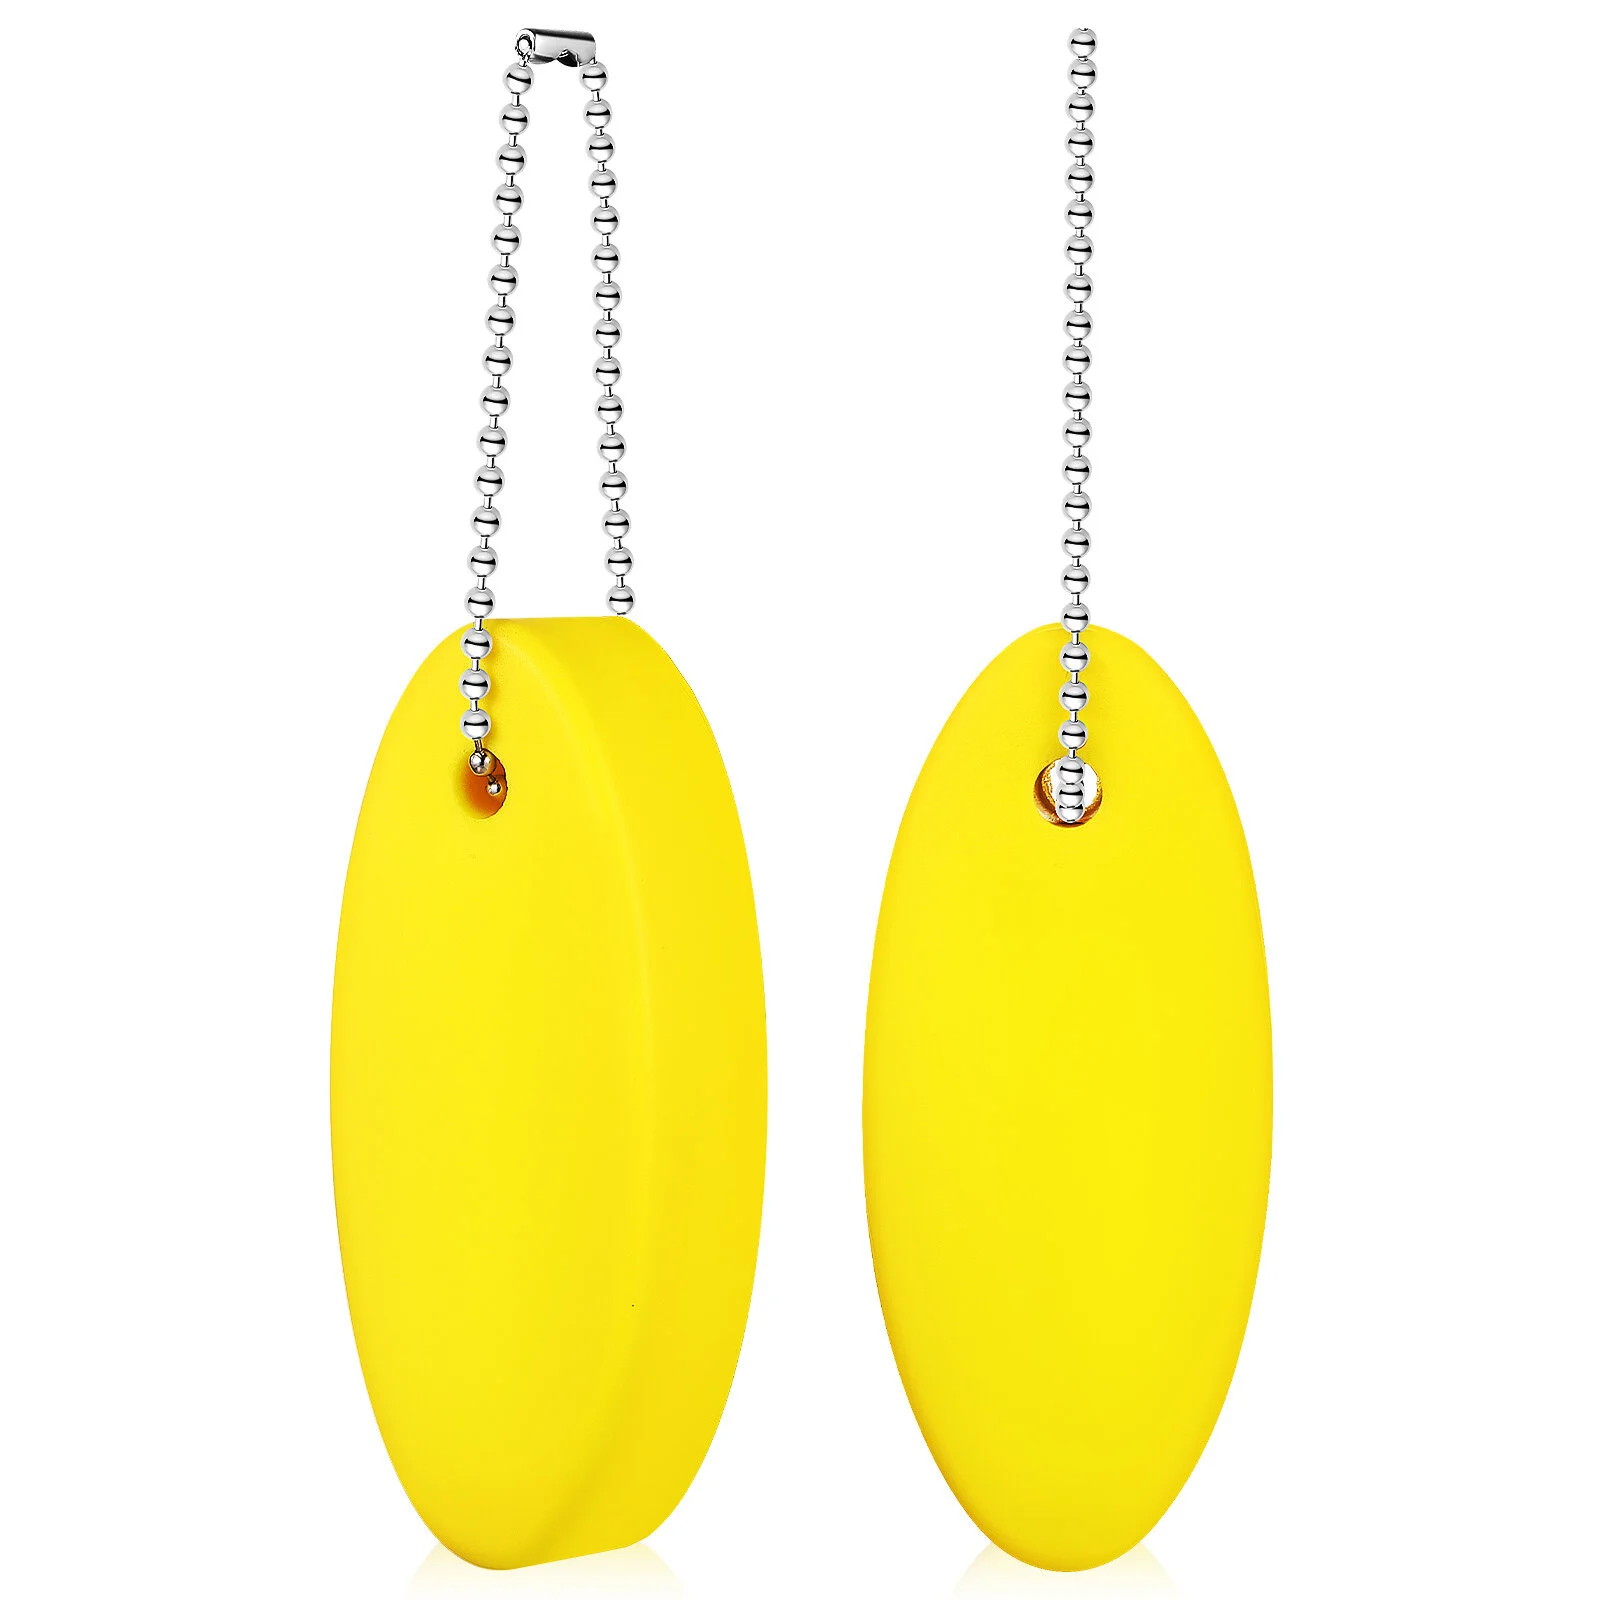 

2Pcs Floating Keyrings Lightweight Oval Float Key Chain for Fishing Surfing Sailing Outdoor Sports